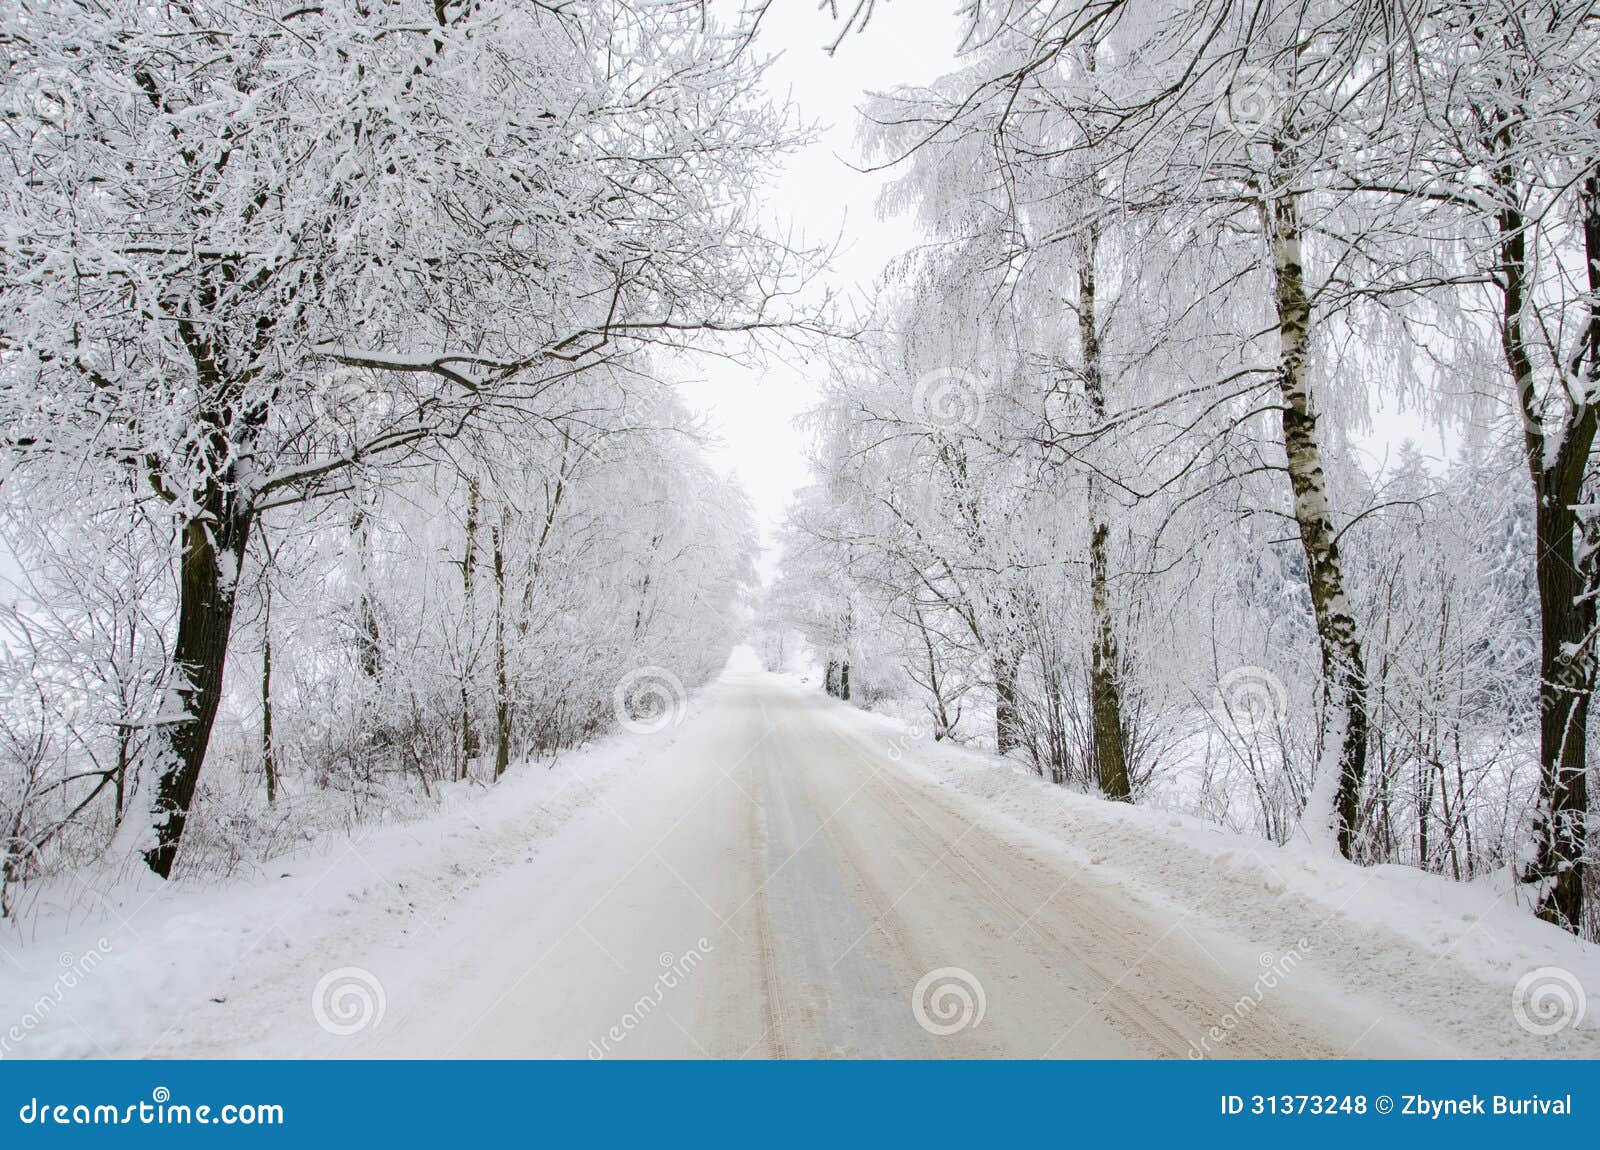 wintry road with snow